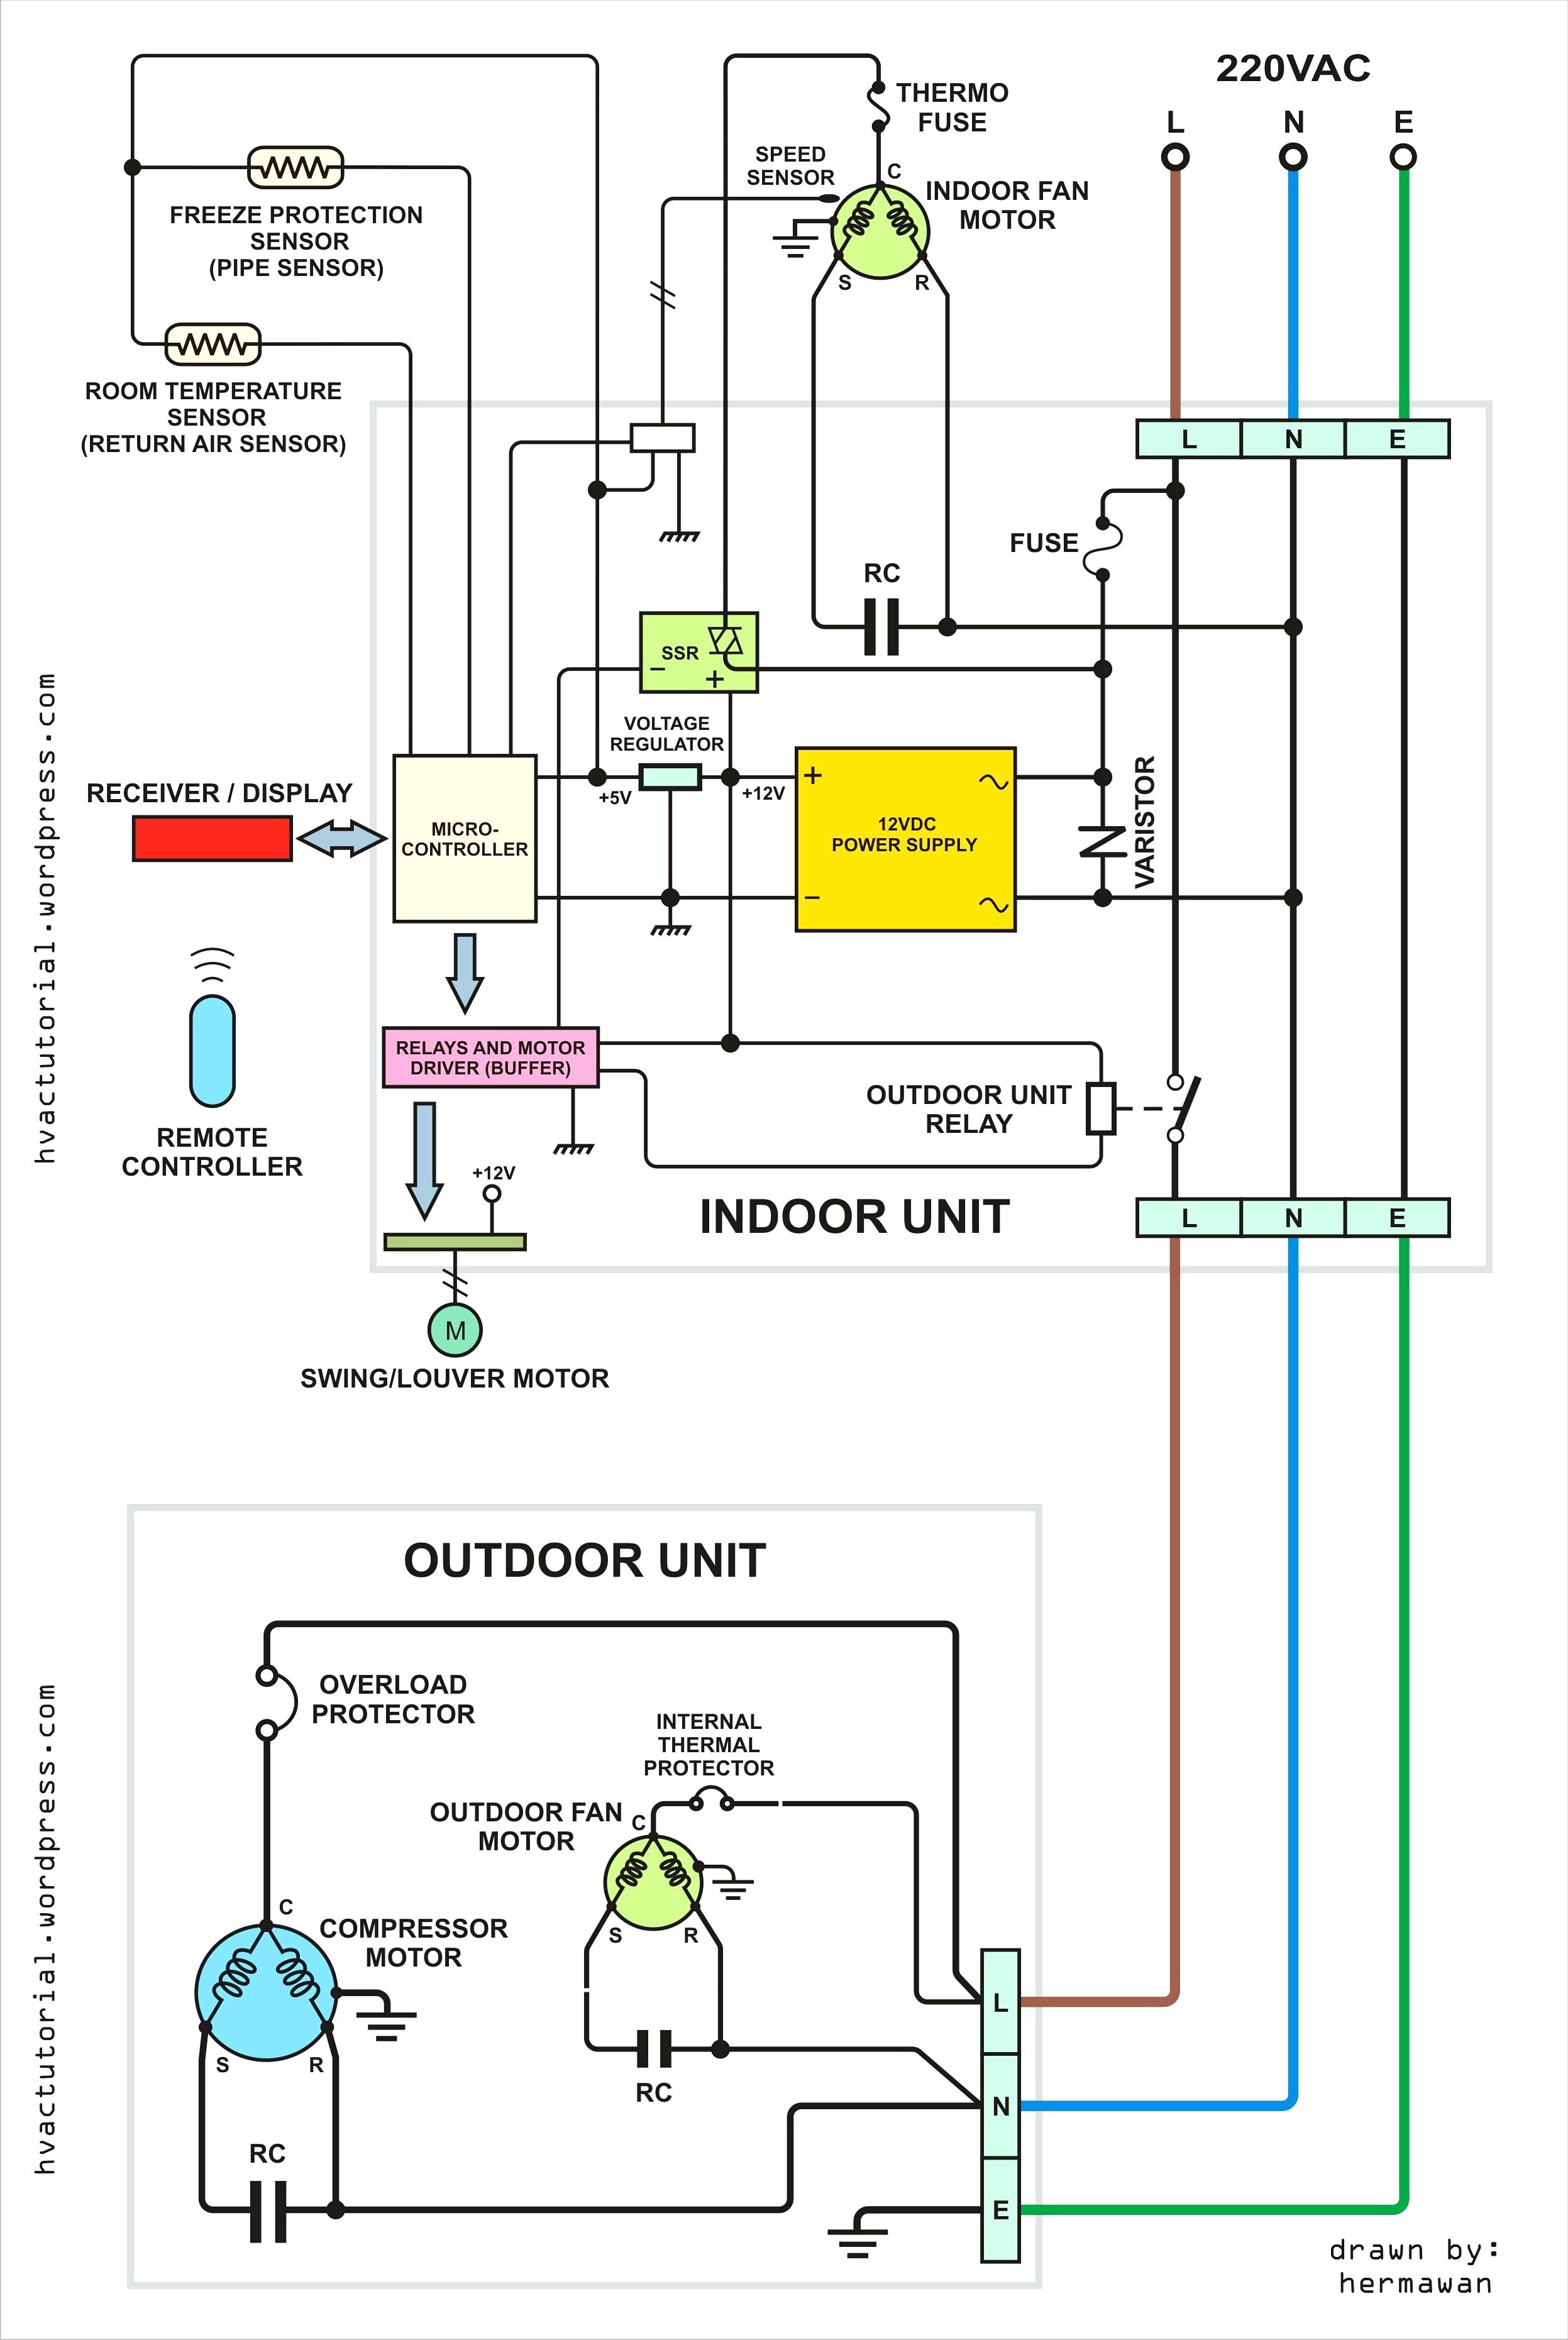 relay kit wiring diagram refrence wiring diagram for phone line rh ipphil Starter Relay Wiring Diagram Relay Switch Wiring Diagram